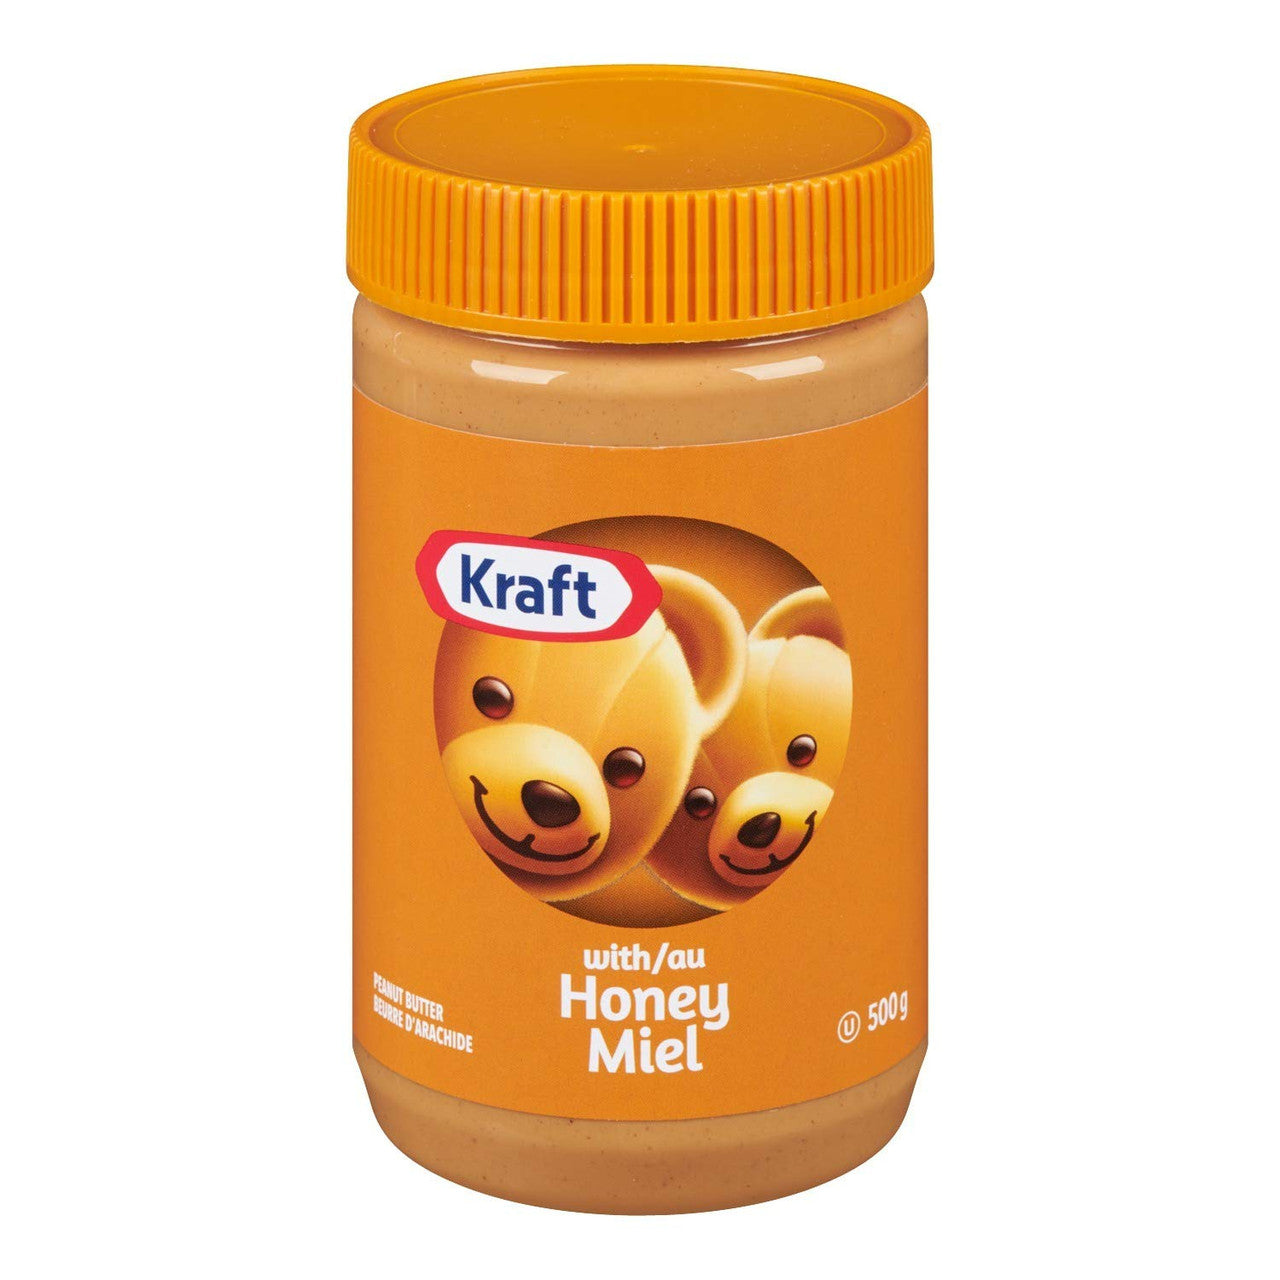 Kraft Peanut Butter with Honey, 500g/17.6oz., (2 Pack) {Imported from Canada}